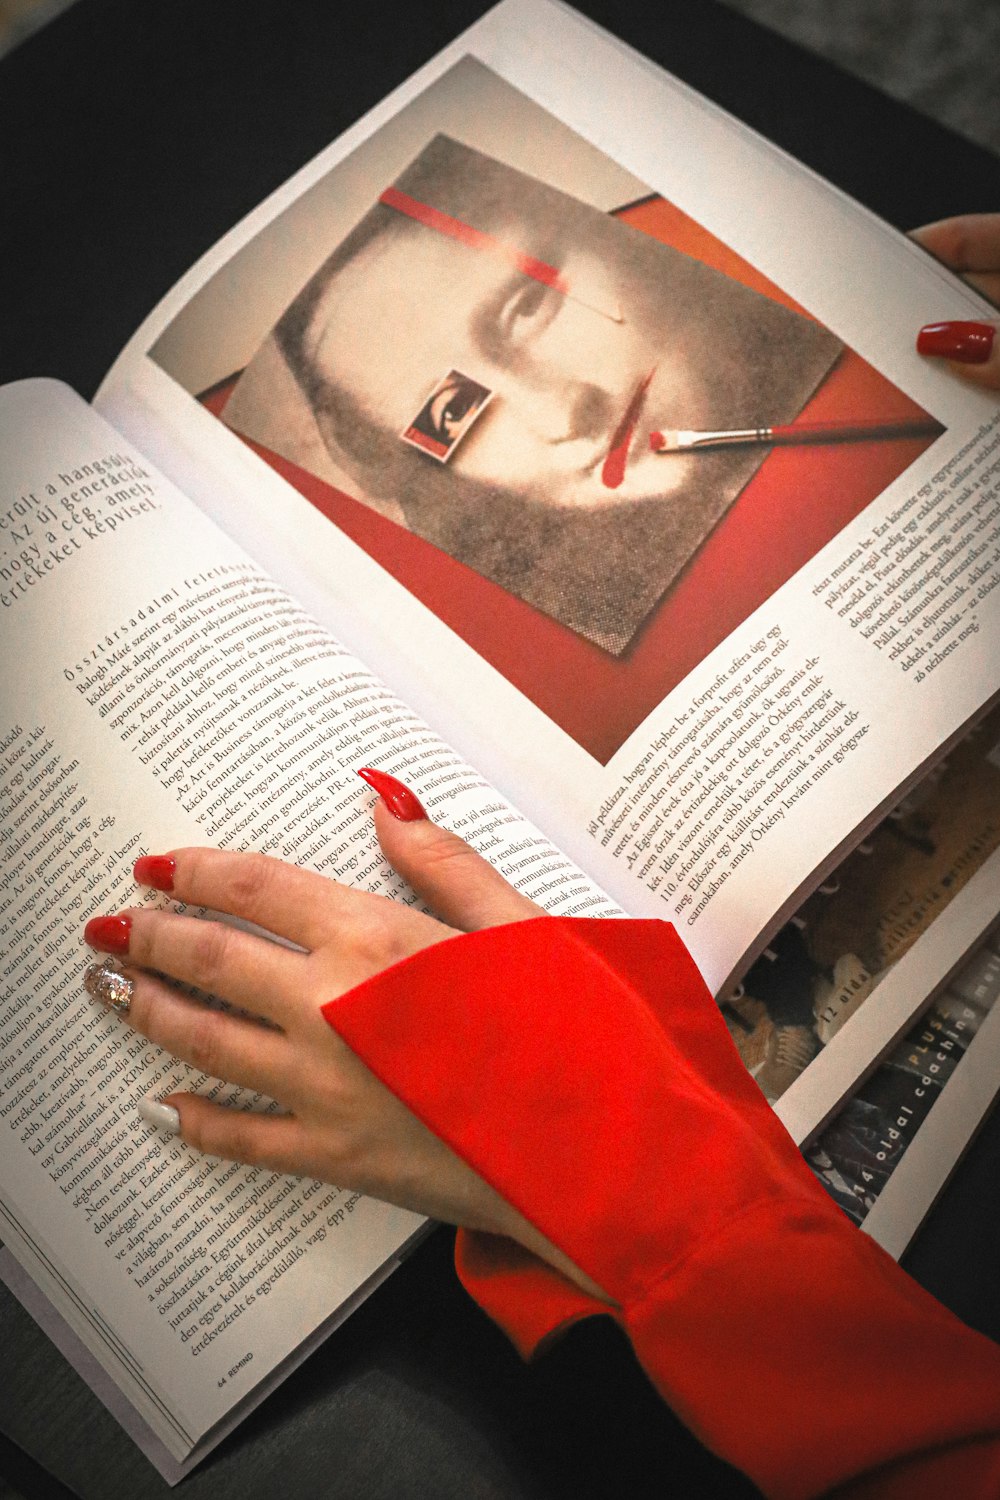 a woman with red nails holding a book